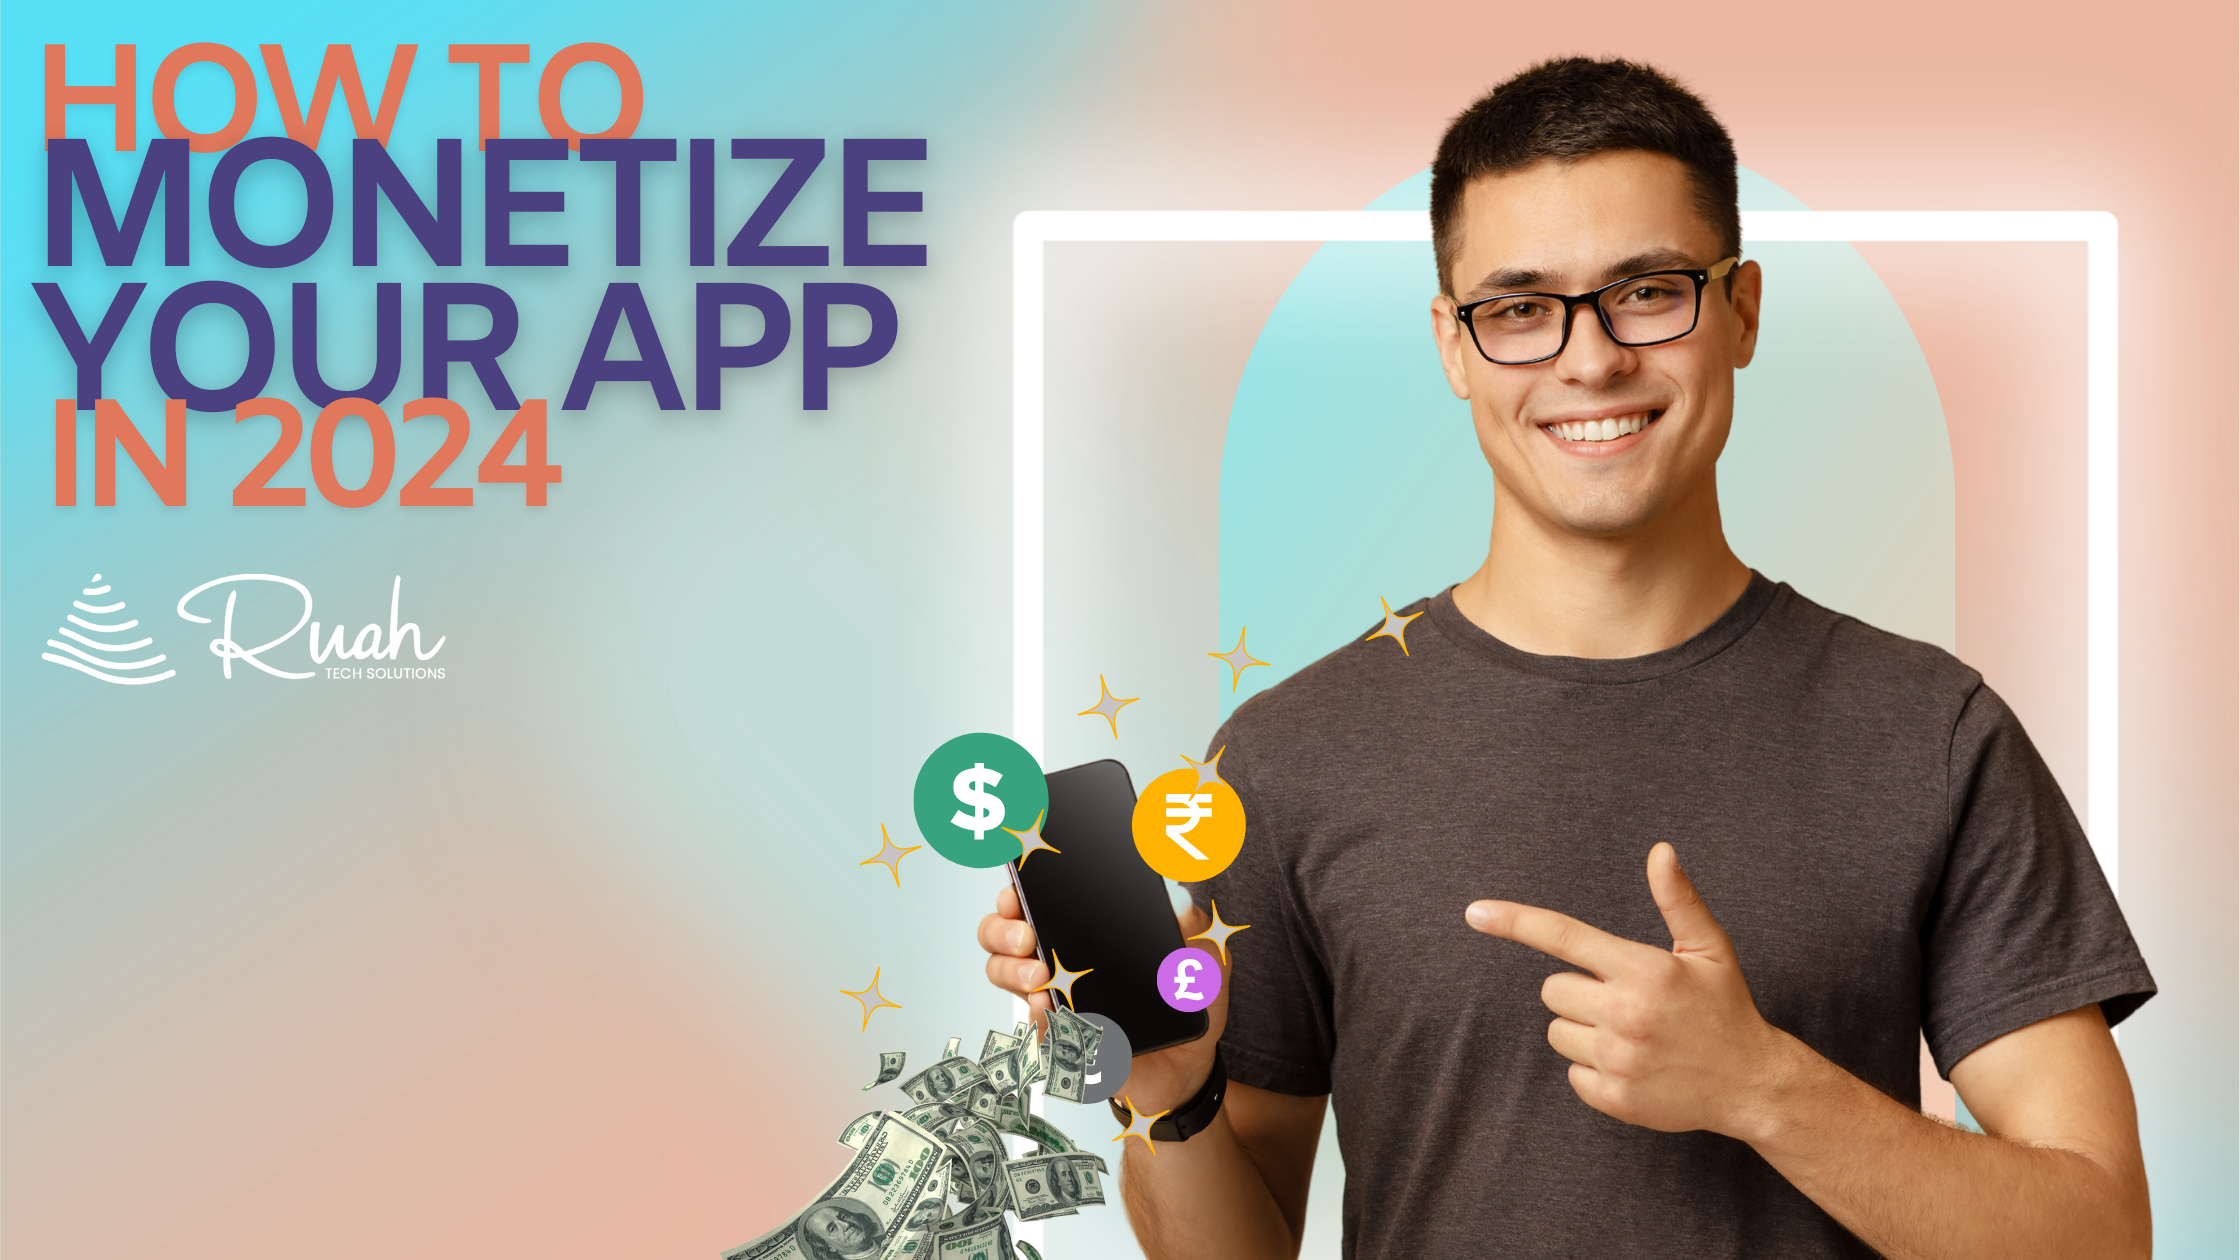 How to monetize your app in 2024 blog